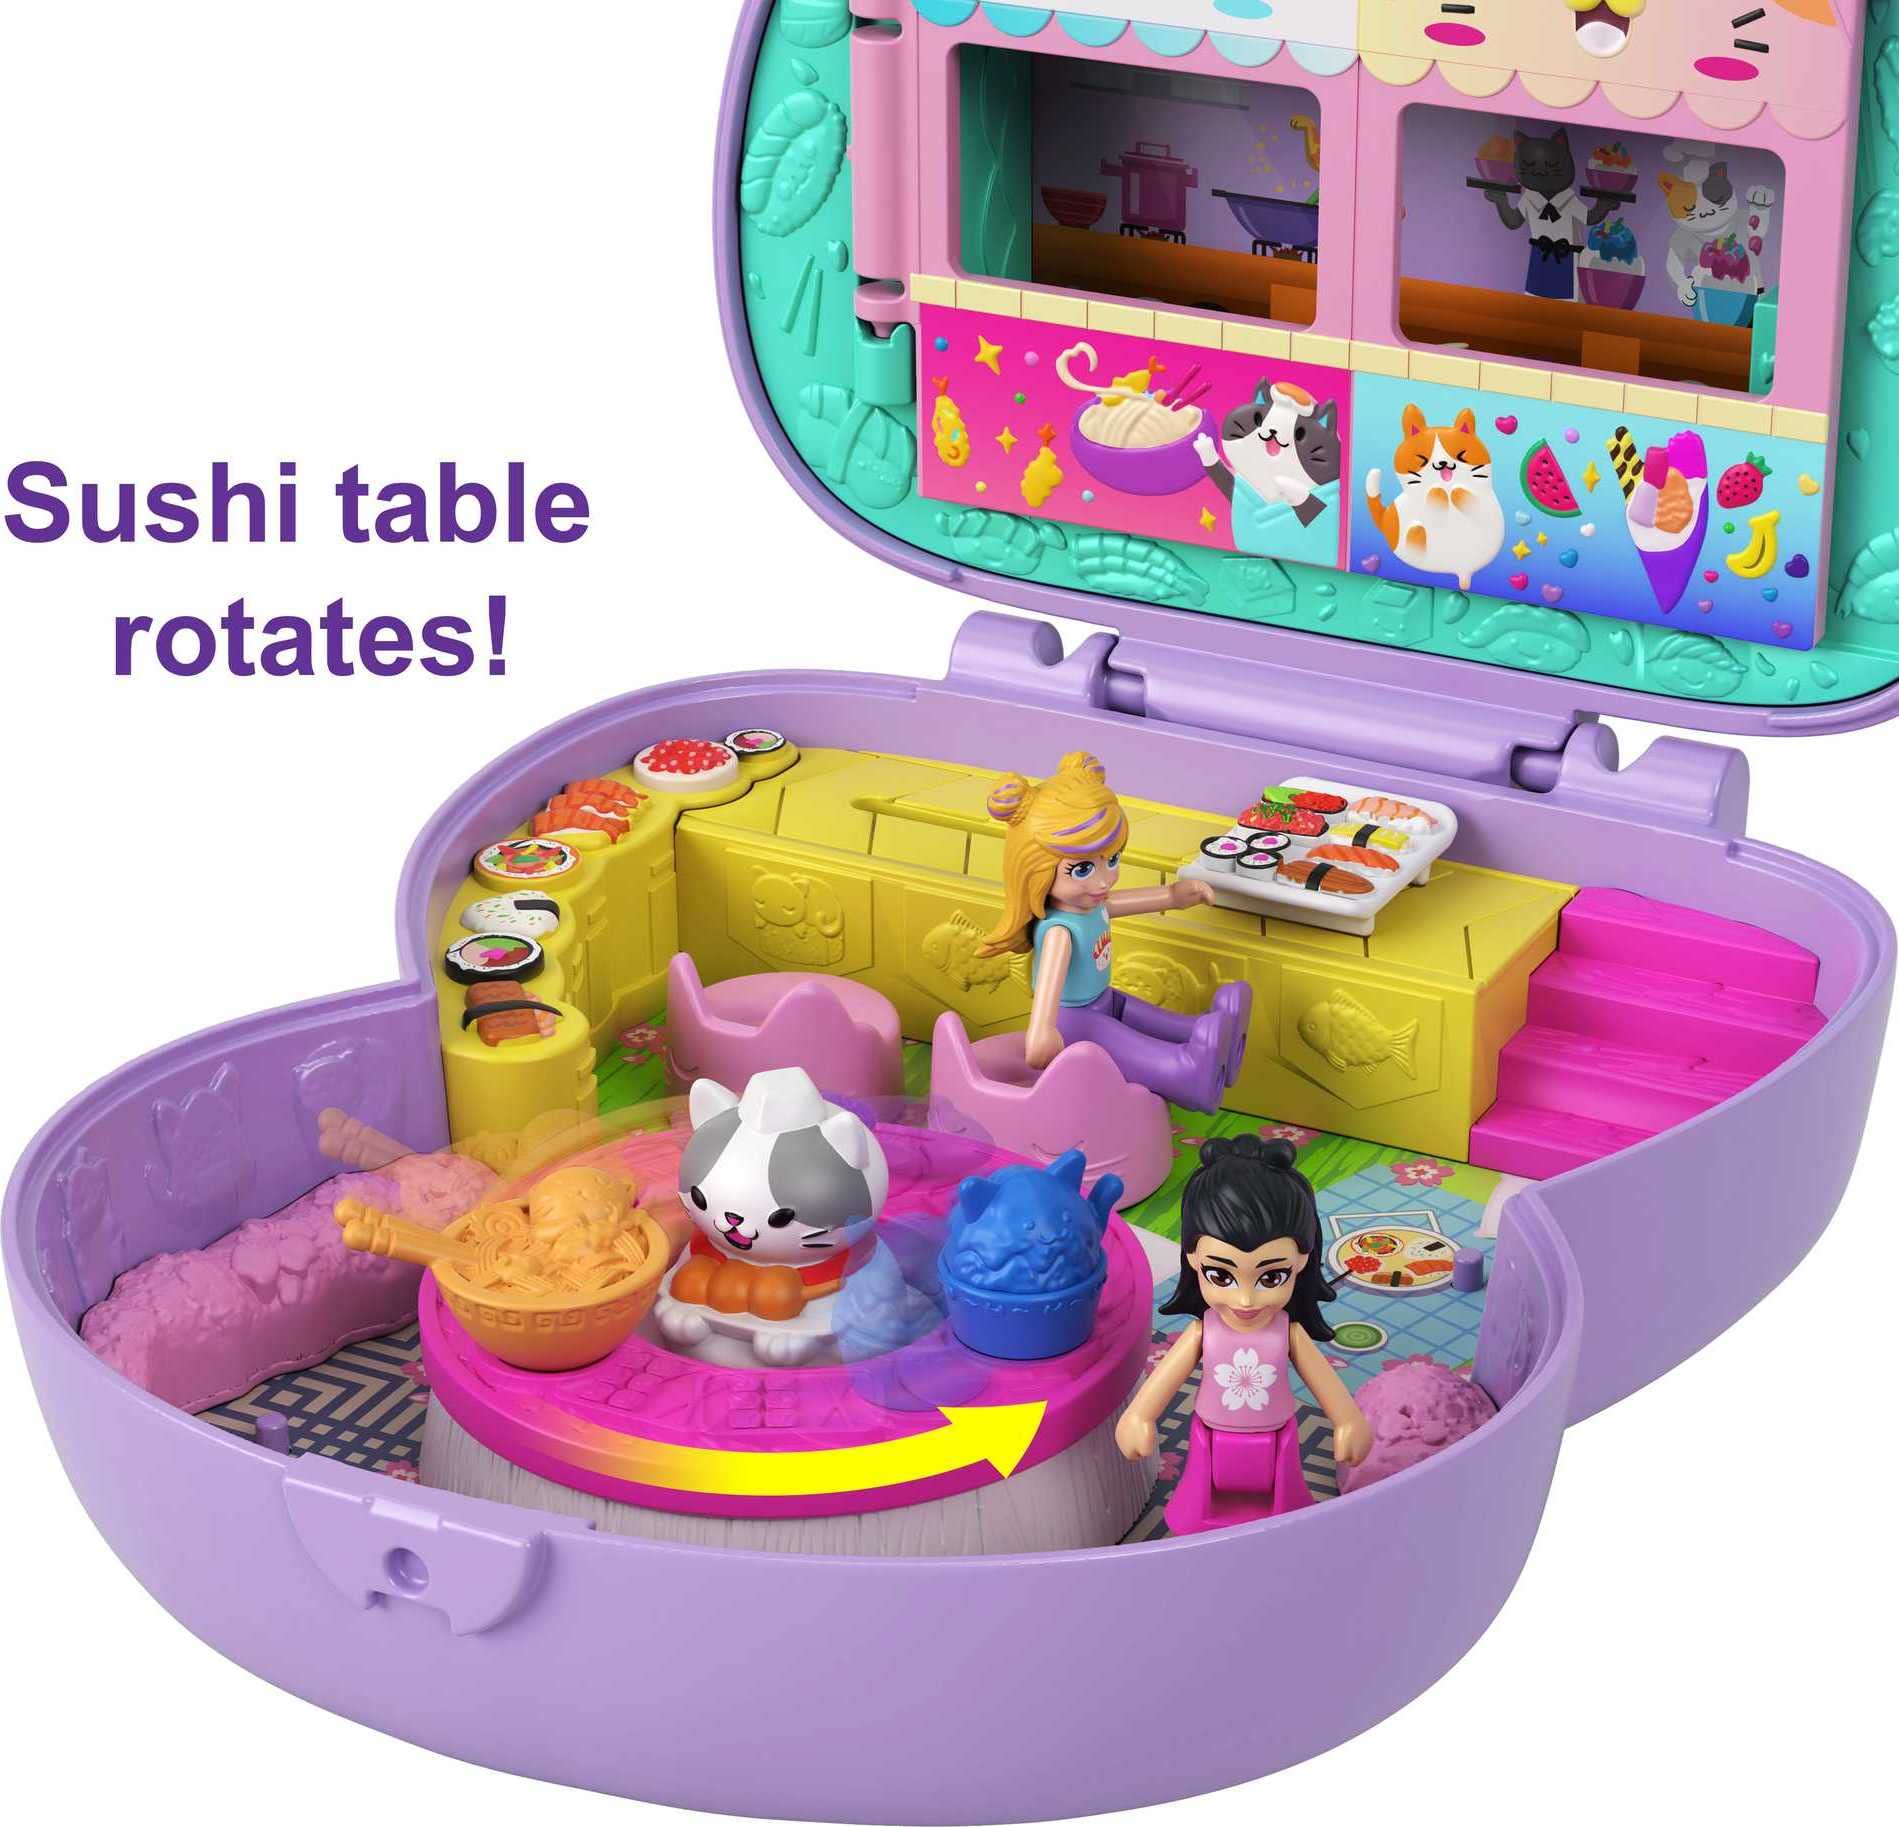 Polly Pocket Compact Playset, Sushi Shop Cat with 2 Micro Dolls & Accessories, Travel Toys with Surprise Reveals